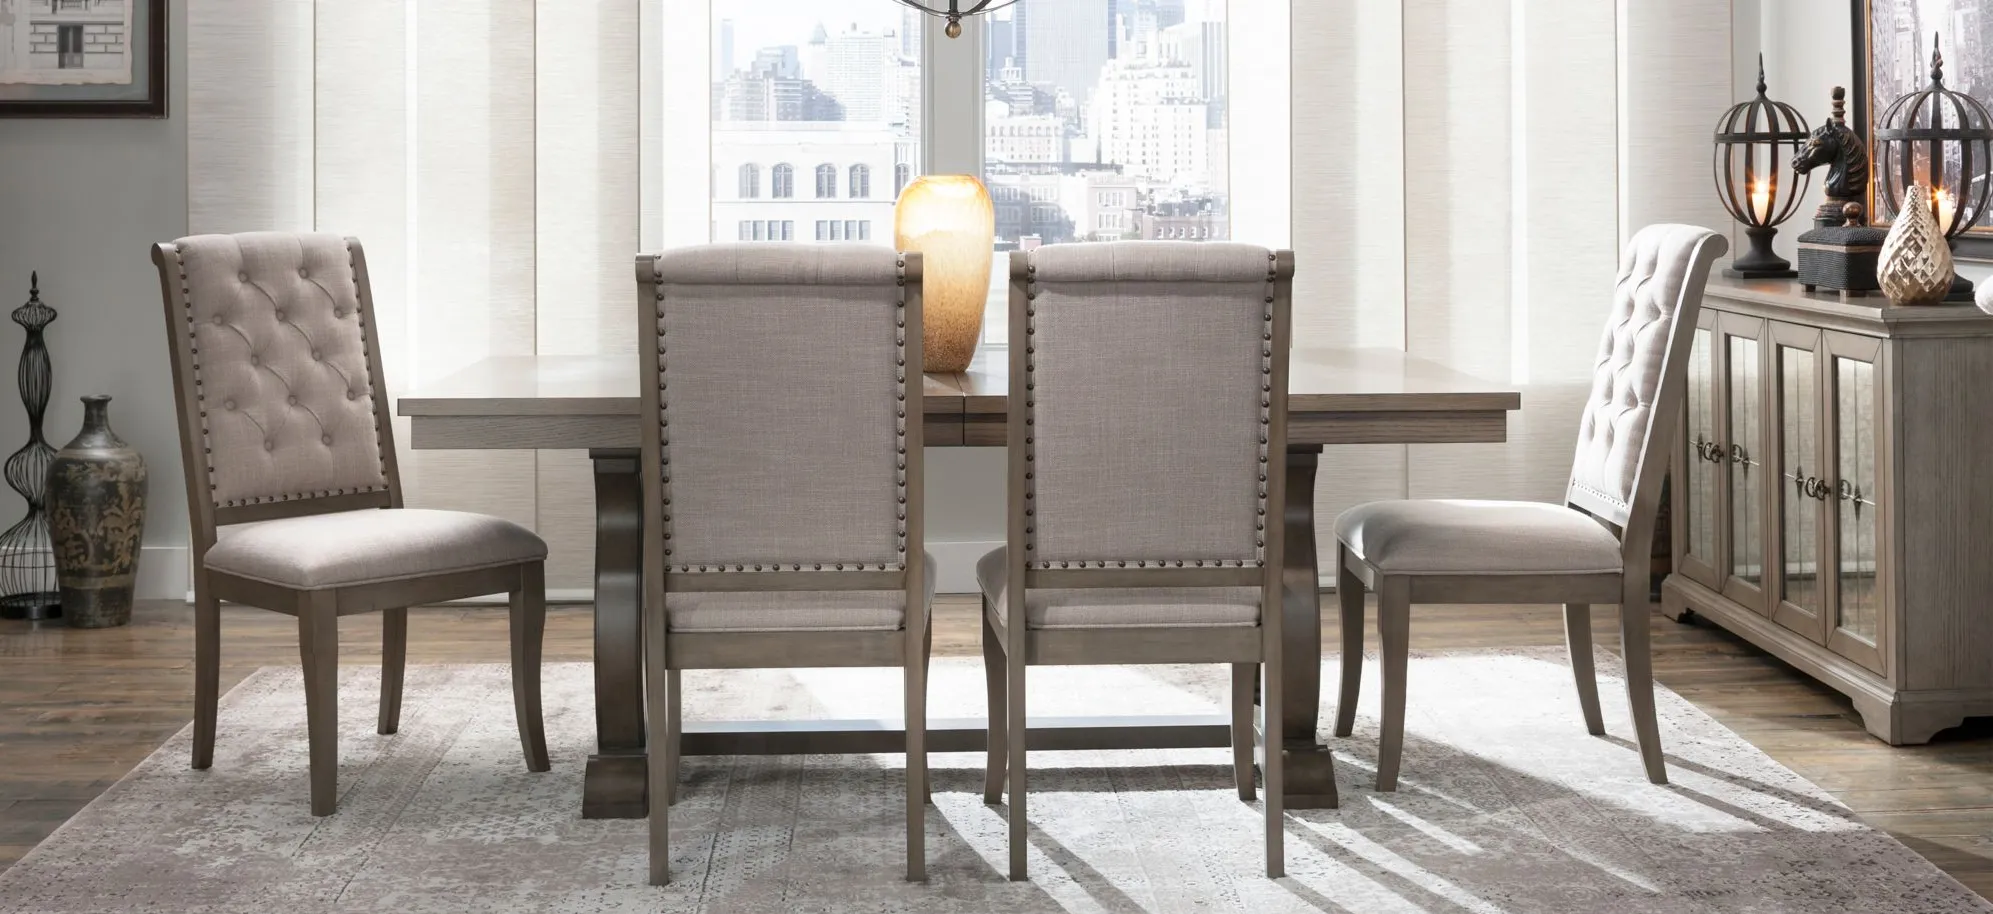 Lorient 7-pc. Dining Set in Light Brown by Homelegance